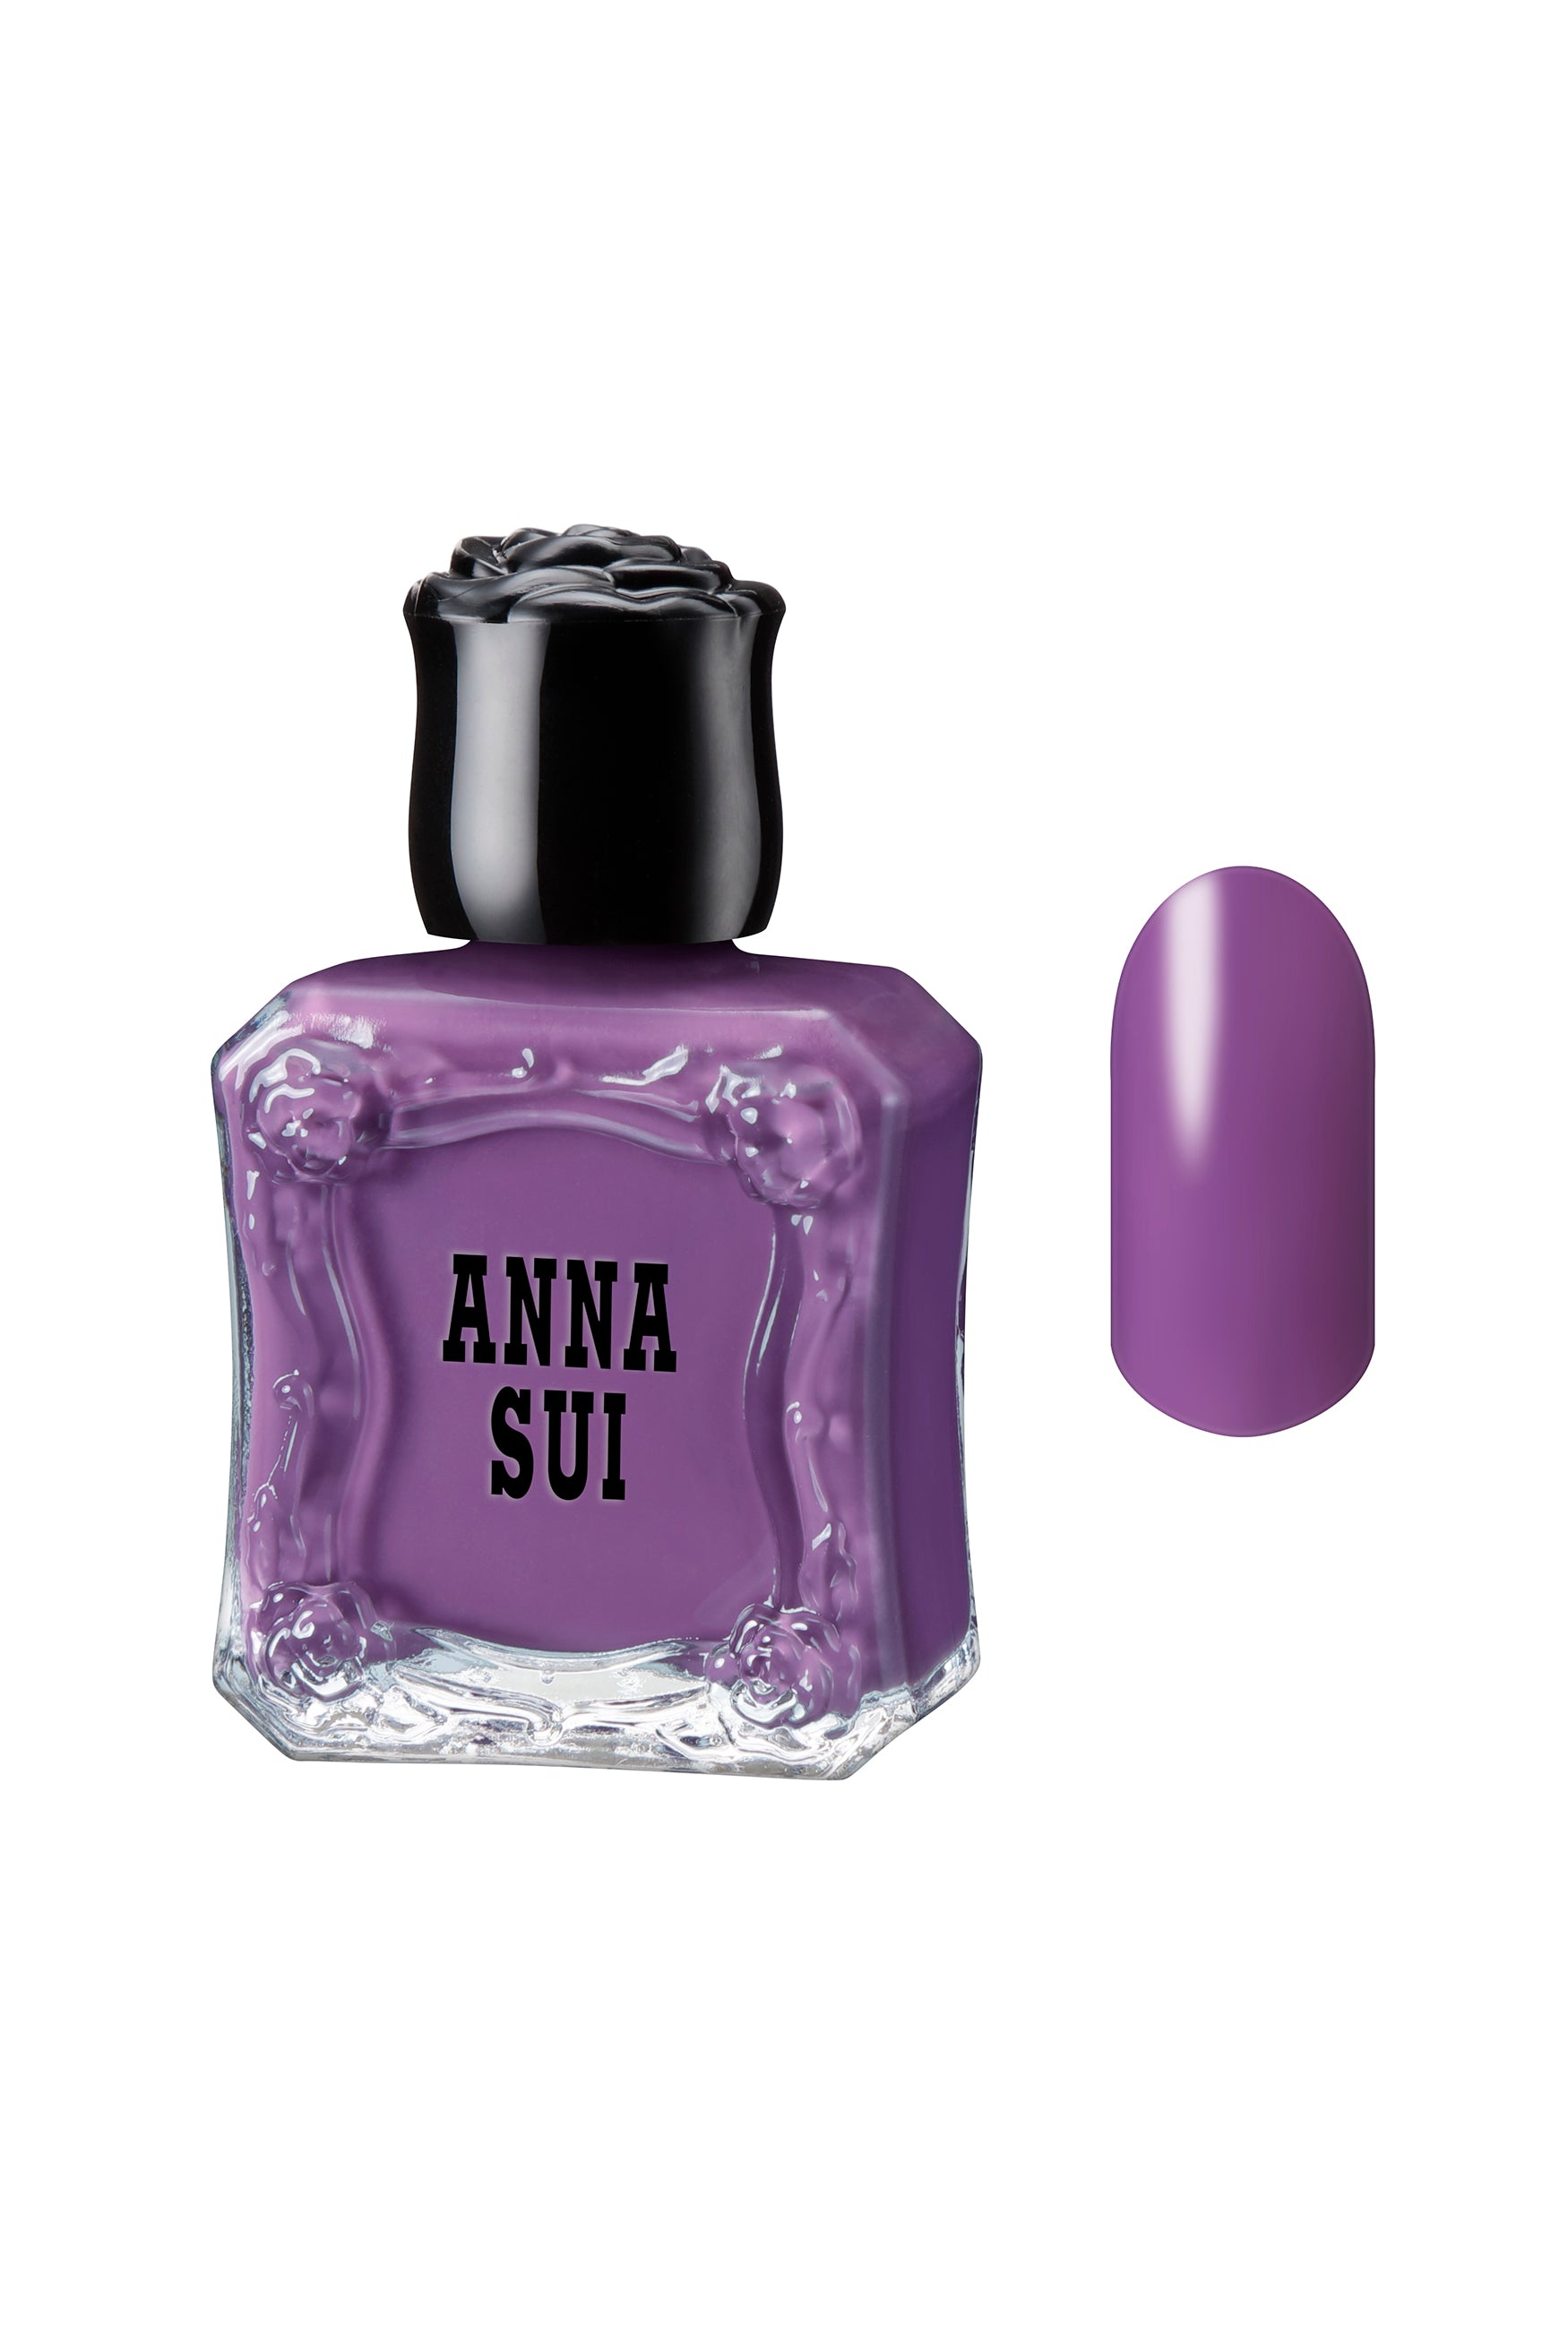 LILAC: Glass bottles with a rose on the black cap are styled like Anna Sui perfume with a rounded brush